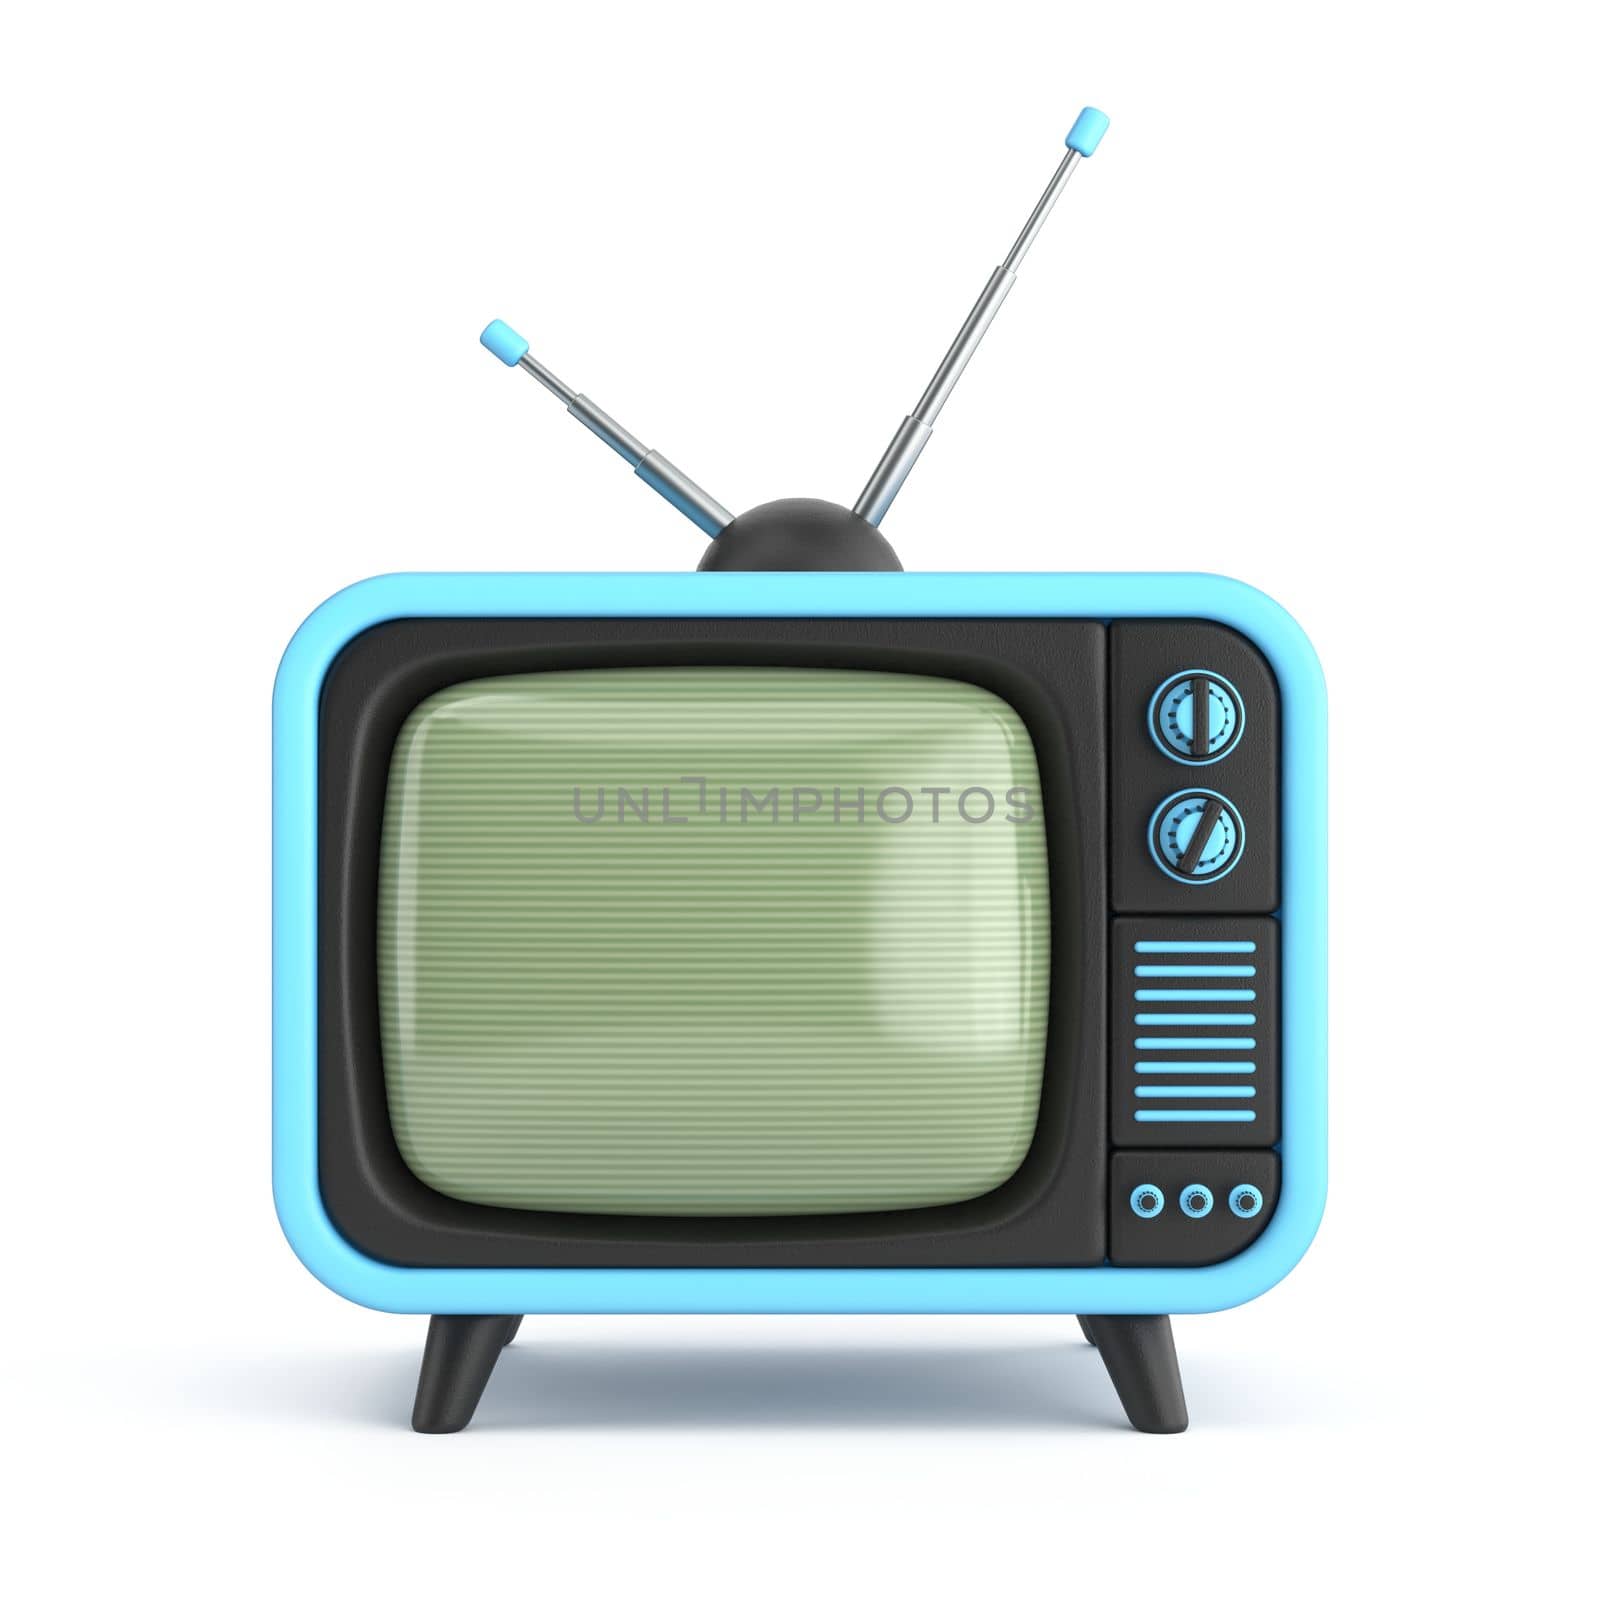 Vintage television TV 3D rendering illustration isolated on white background